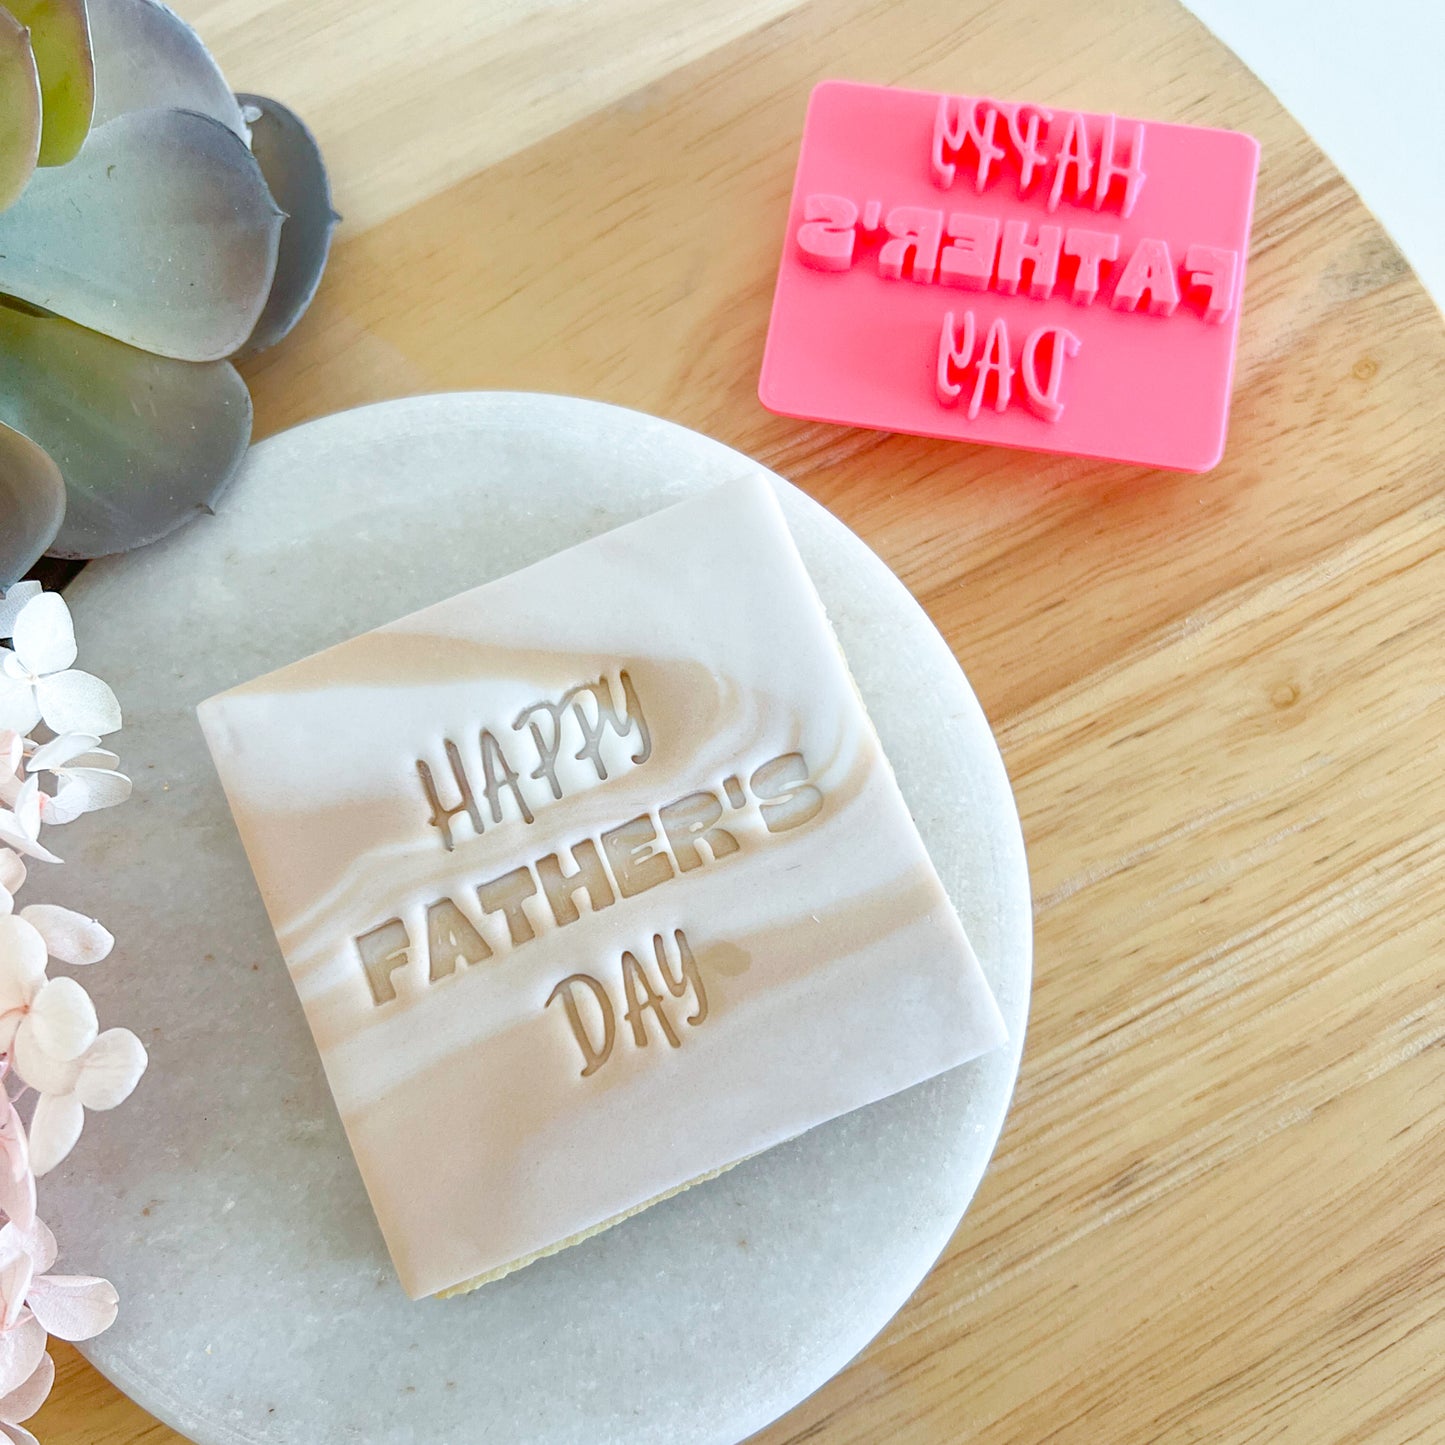 Happy Father's Day - Emboss Stamp